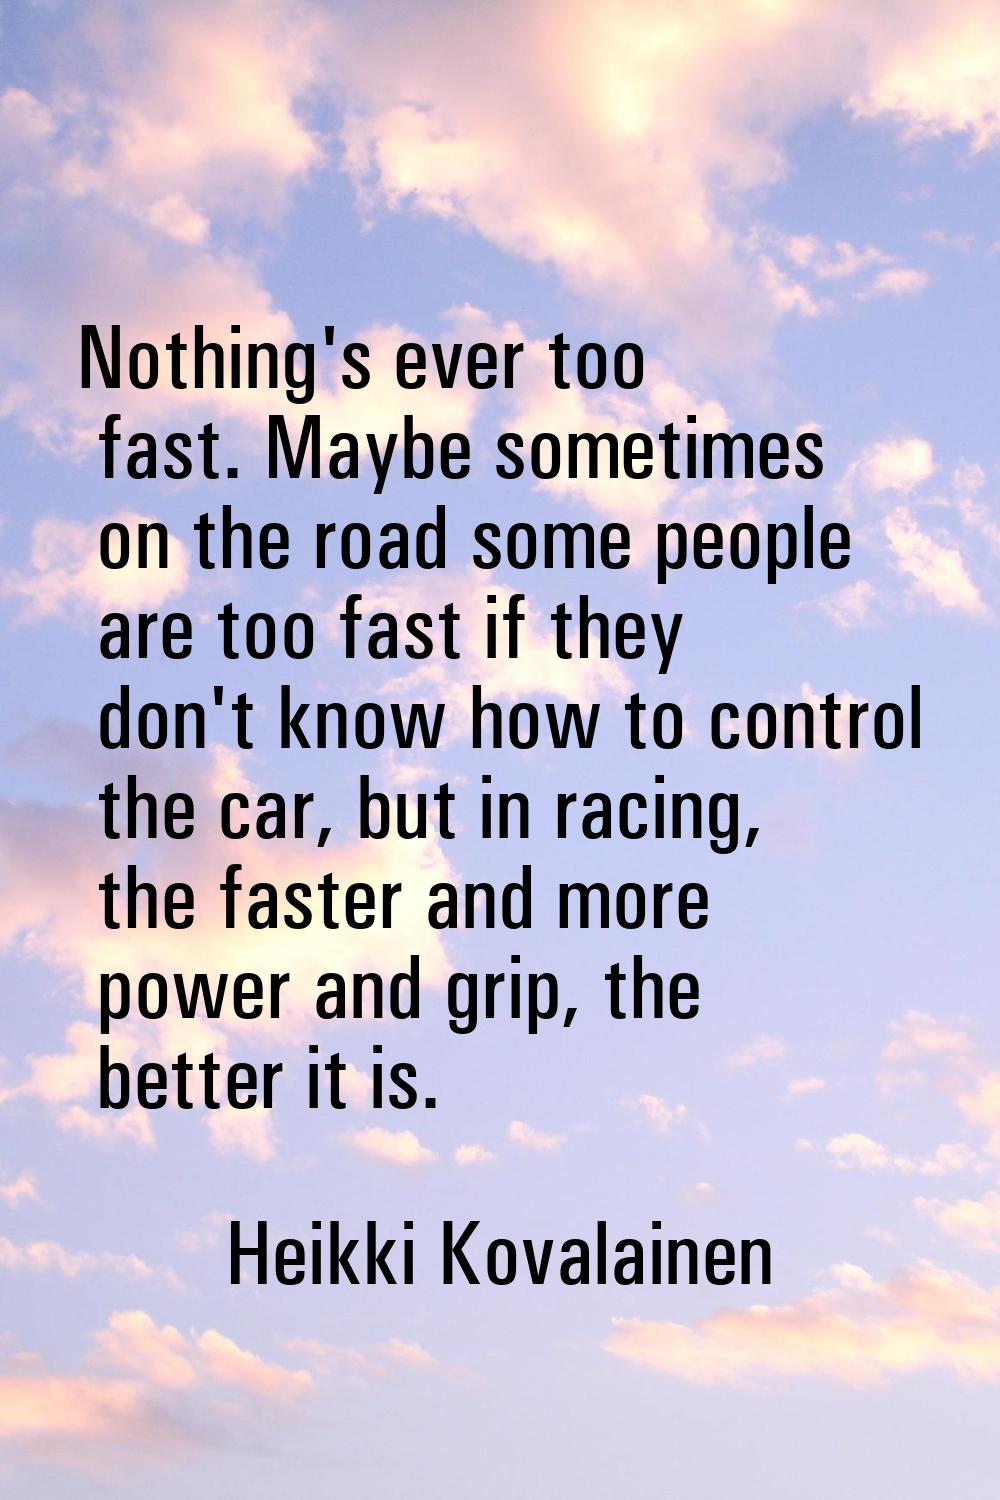 Nothing's ever too fast. Maybe sometimes on the road some people are too fast if they don't know ho